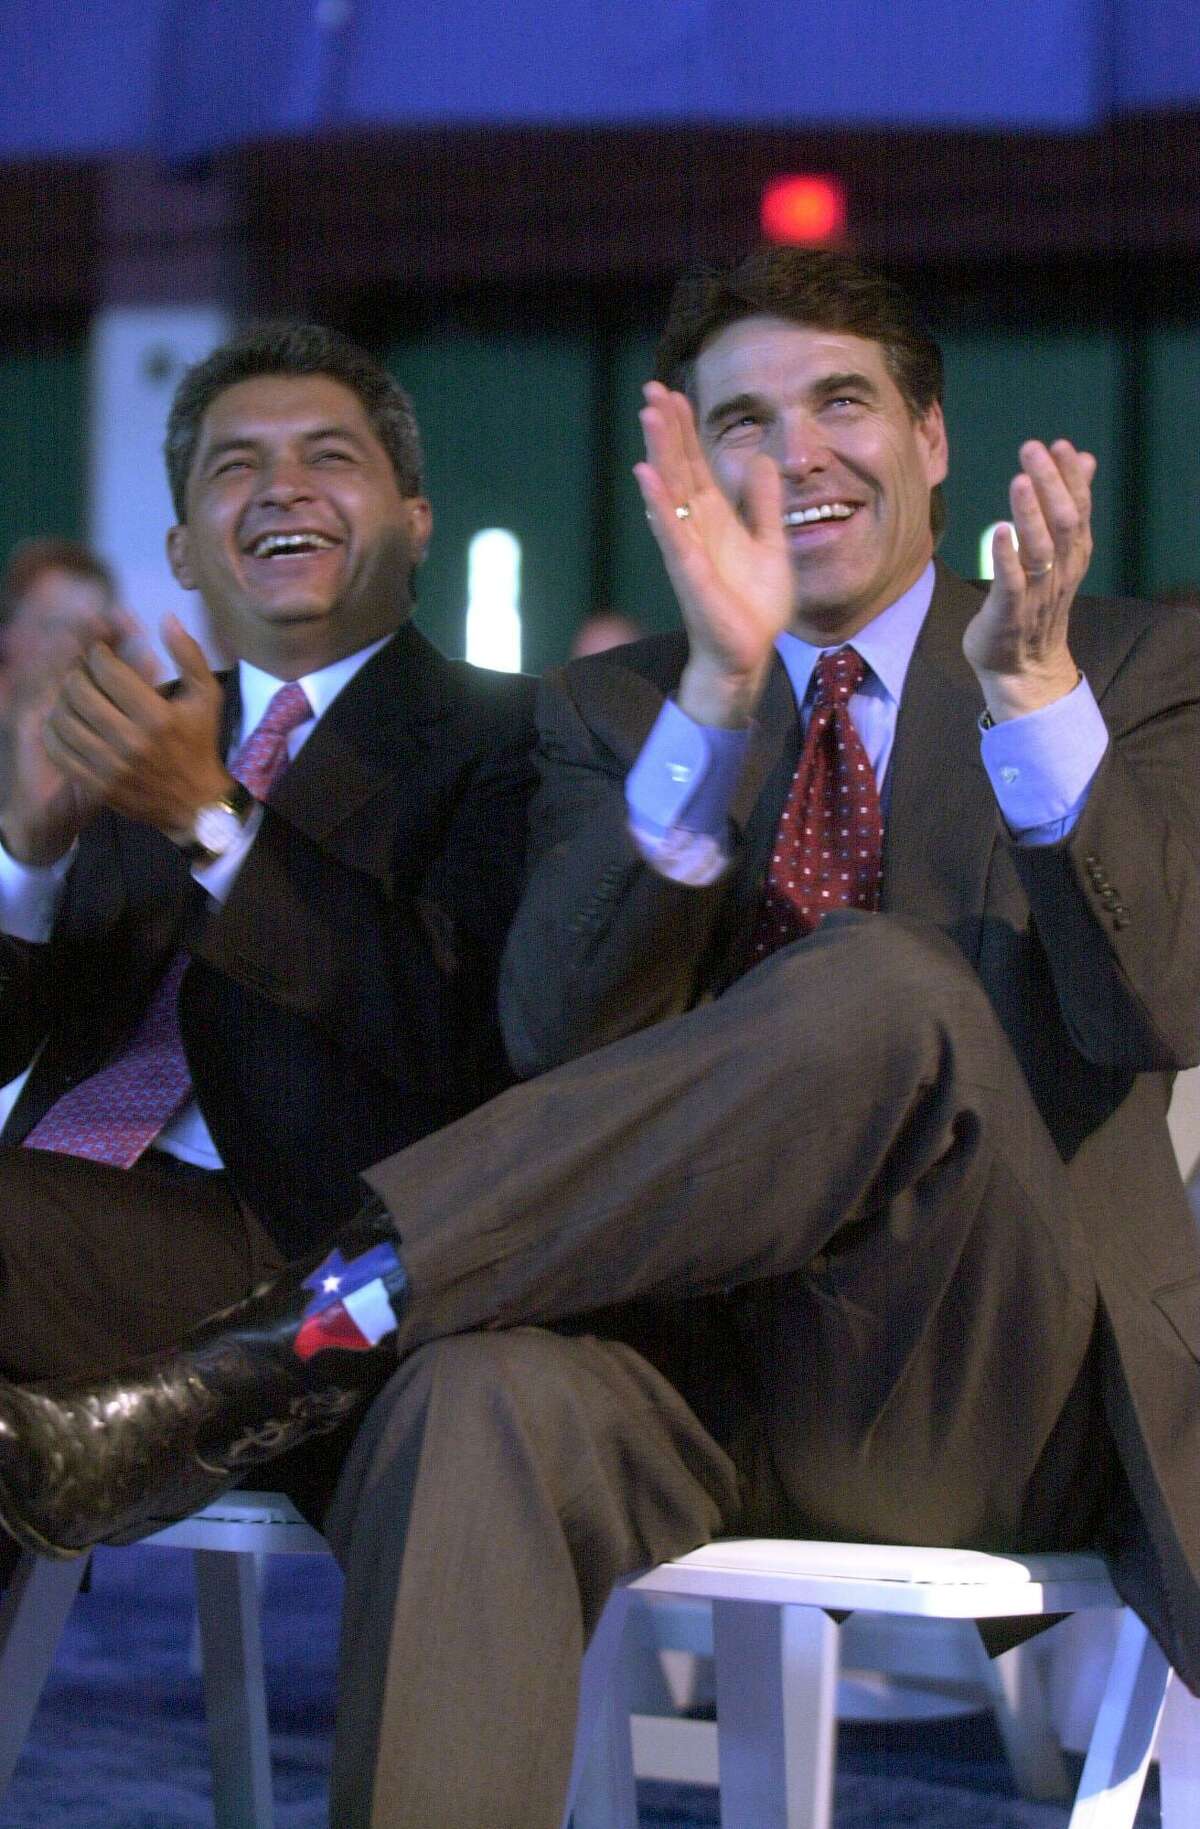 In this 2001 photo, then-Texas Gov. Rick Perry (right) and then-Tamaulipas Gov. Tomás Yarrington laugh as they listen to a speech by Fernando Canales Clariond, governor of the Mexican state of Nuevo Leon.